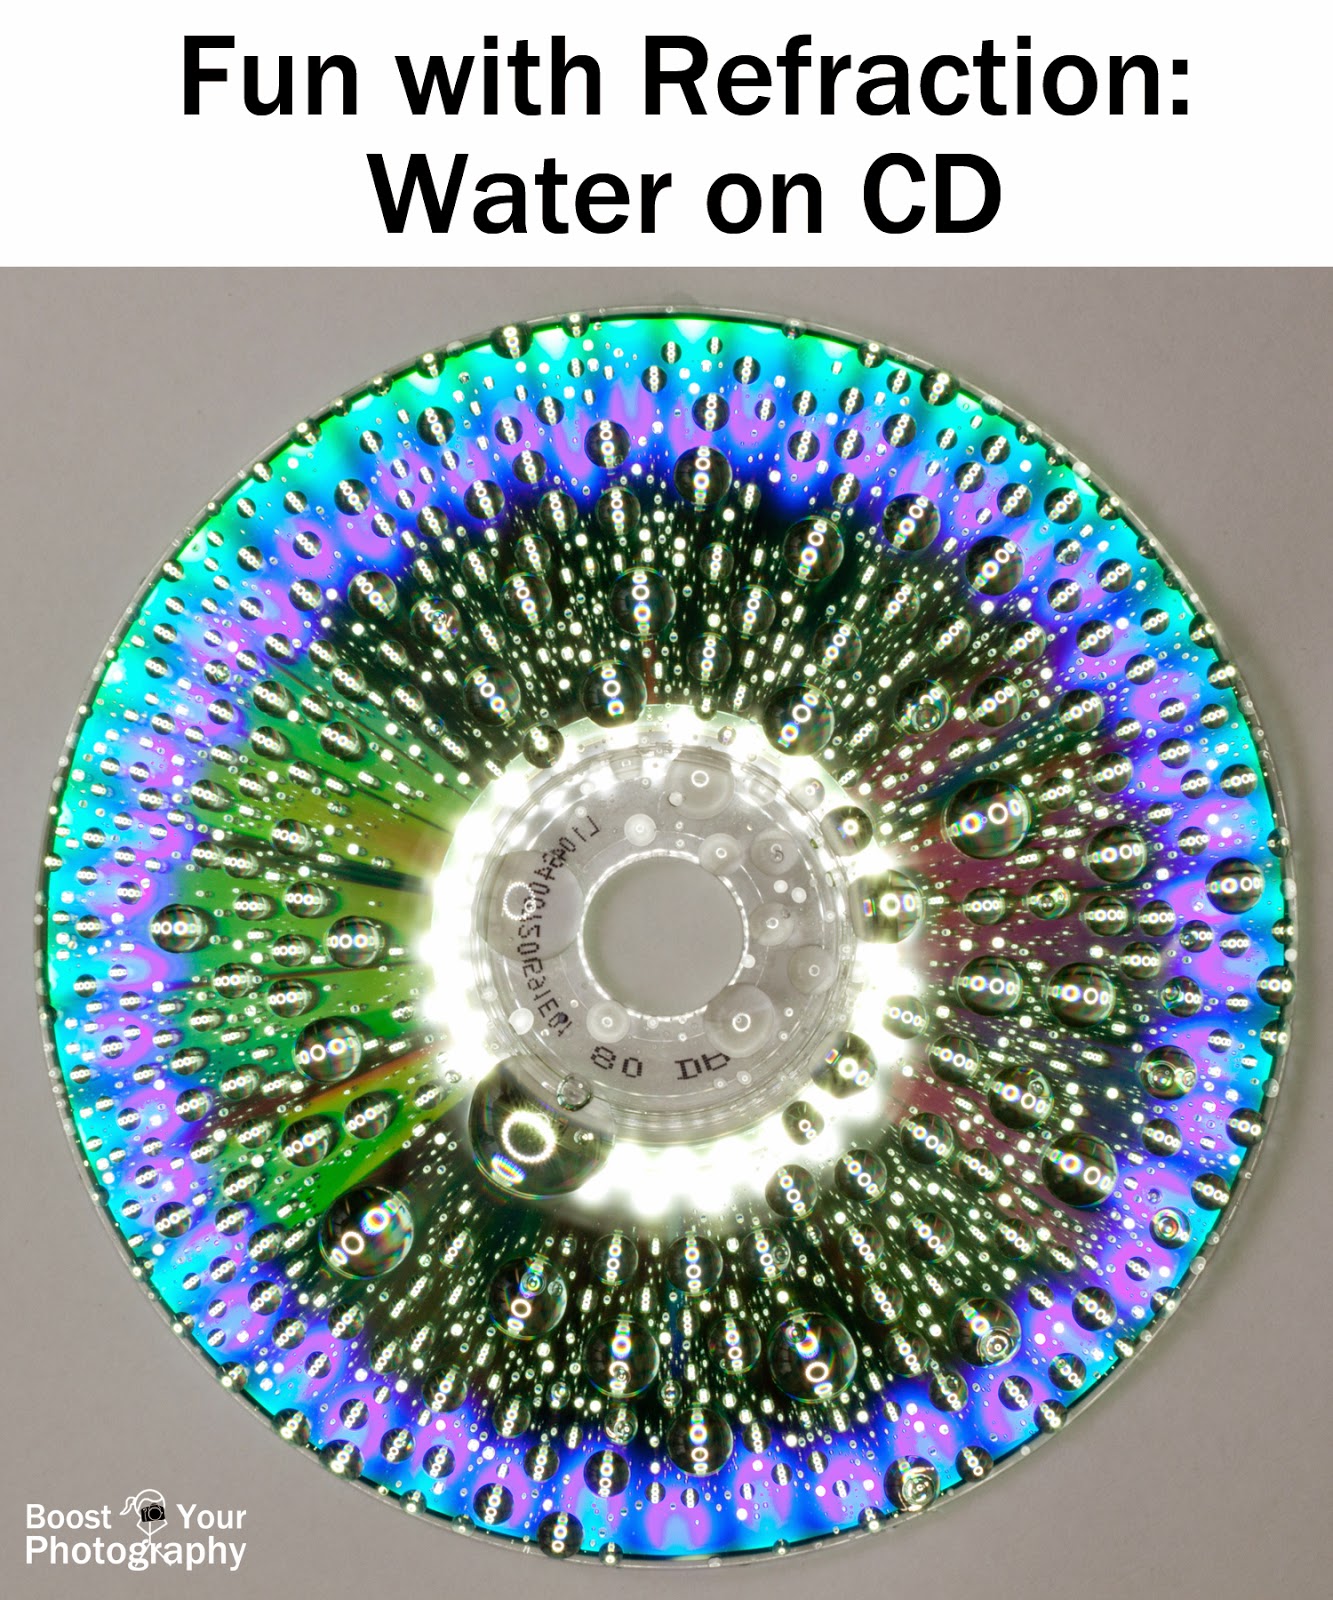 Fun with Refraction: water on CD | Boost Your Photography